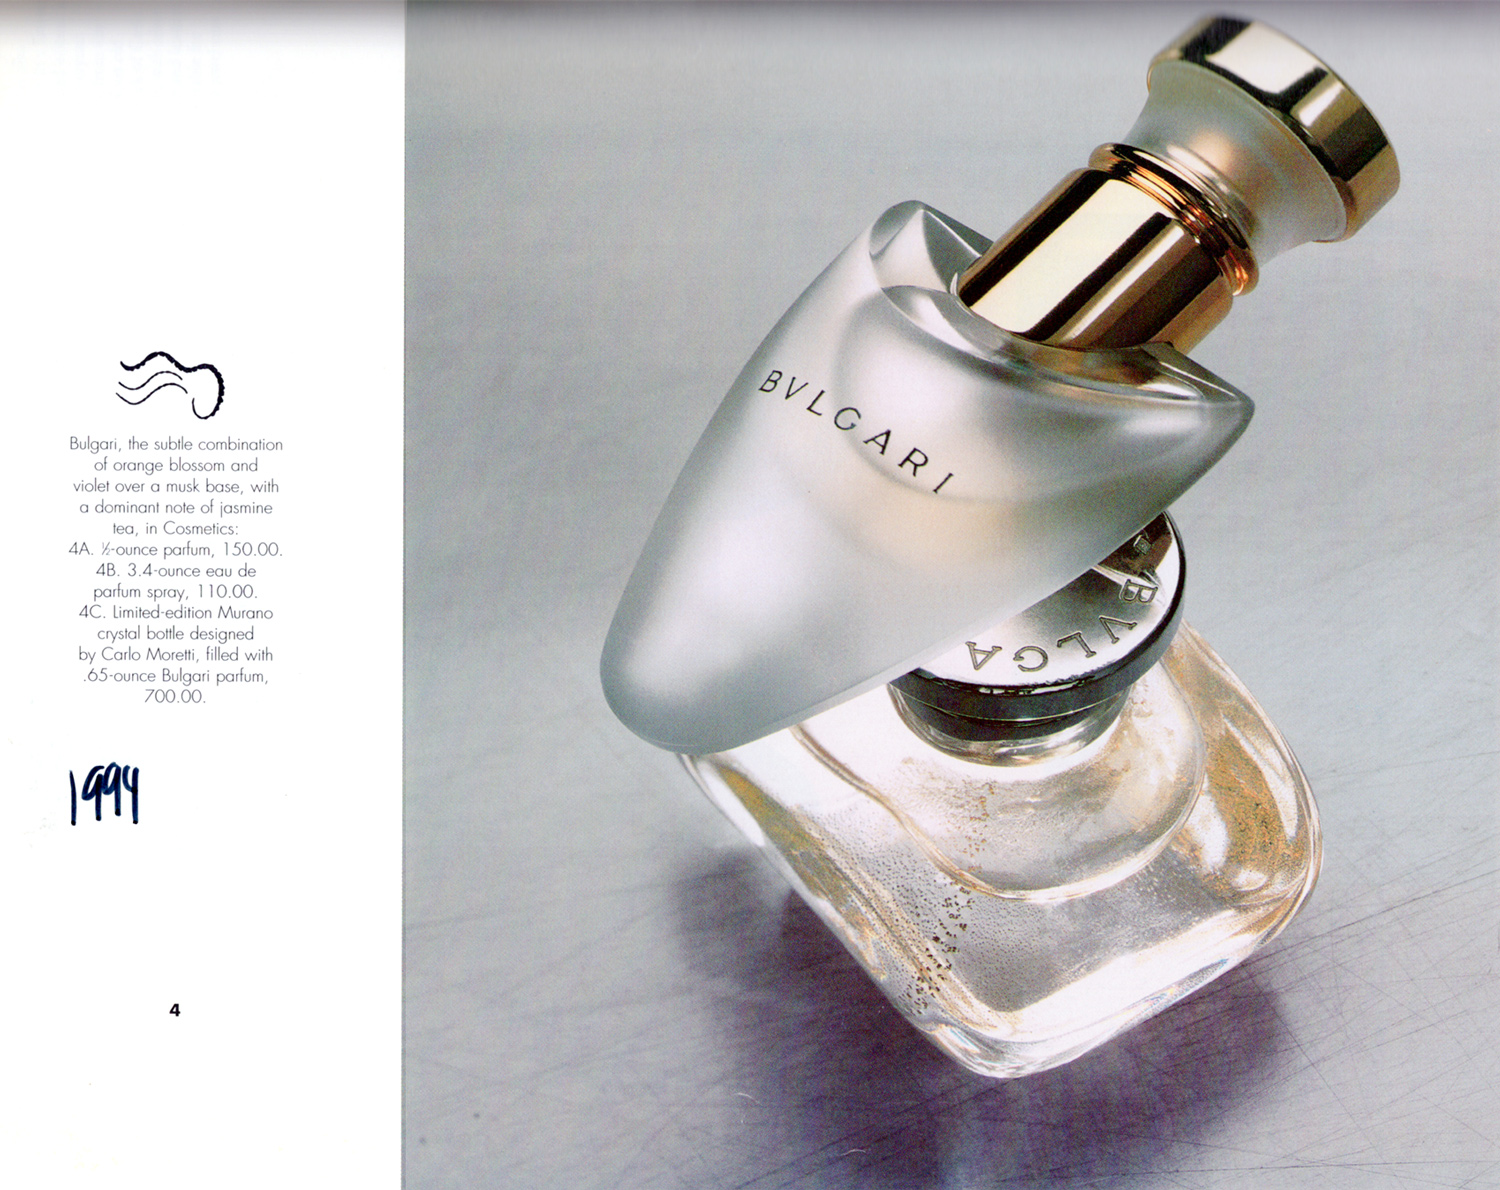 Advertisement Ad Page Catalog Neiman Marcus Bvlgari Bulgari Murano Italy Crystal Perfume Bottle Carlo Moretti Sterling Silver Numbered Limited Edition Gold